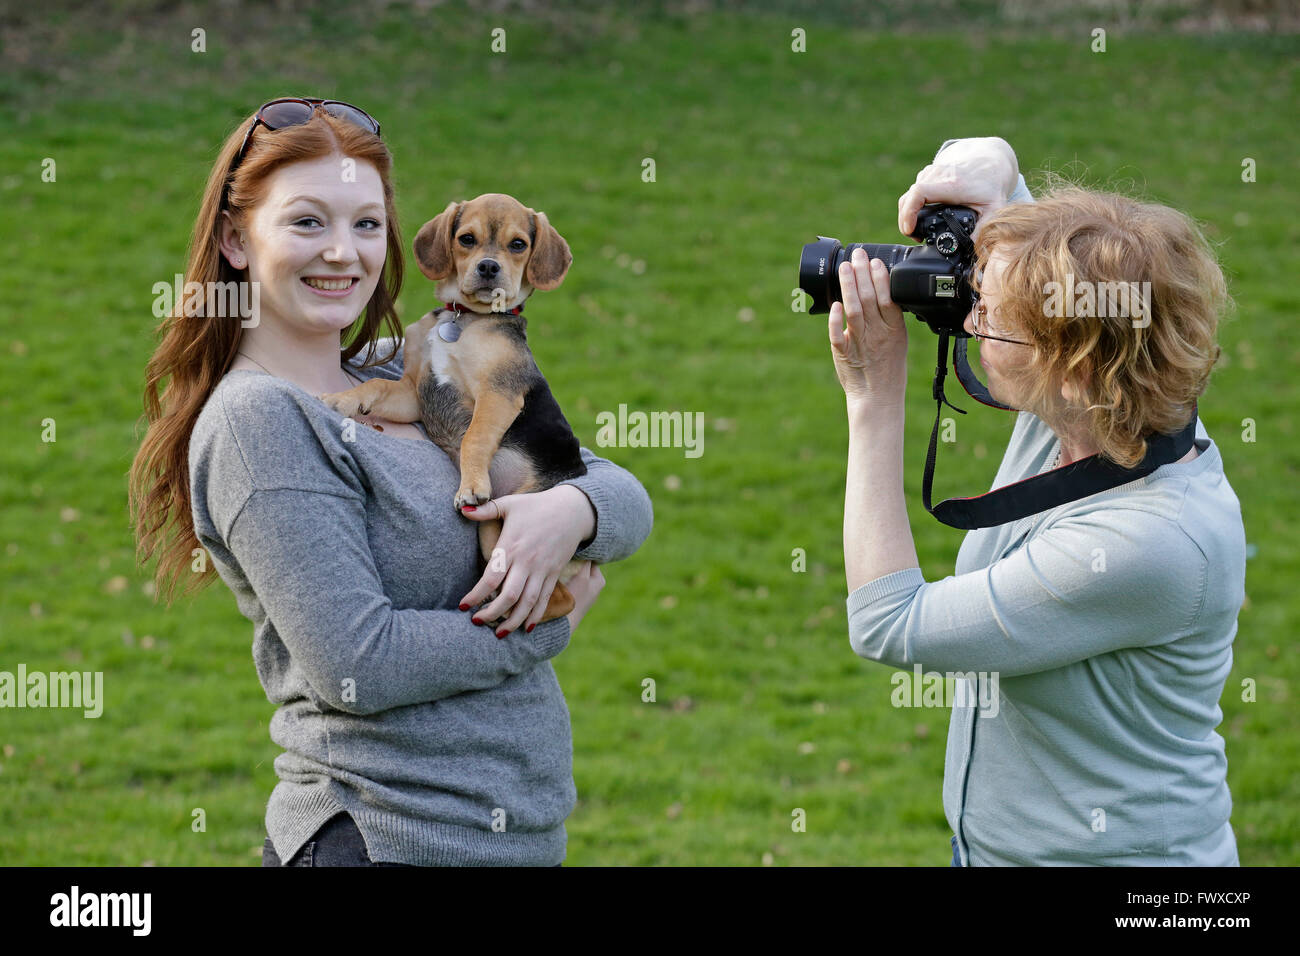 mother taking photos of daughter with her small dog Stock Photo